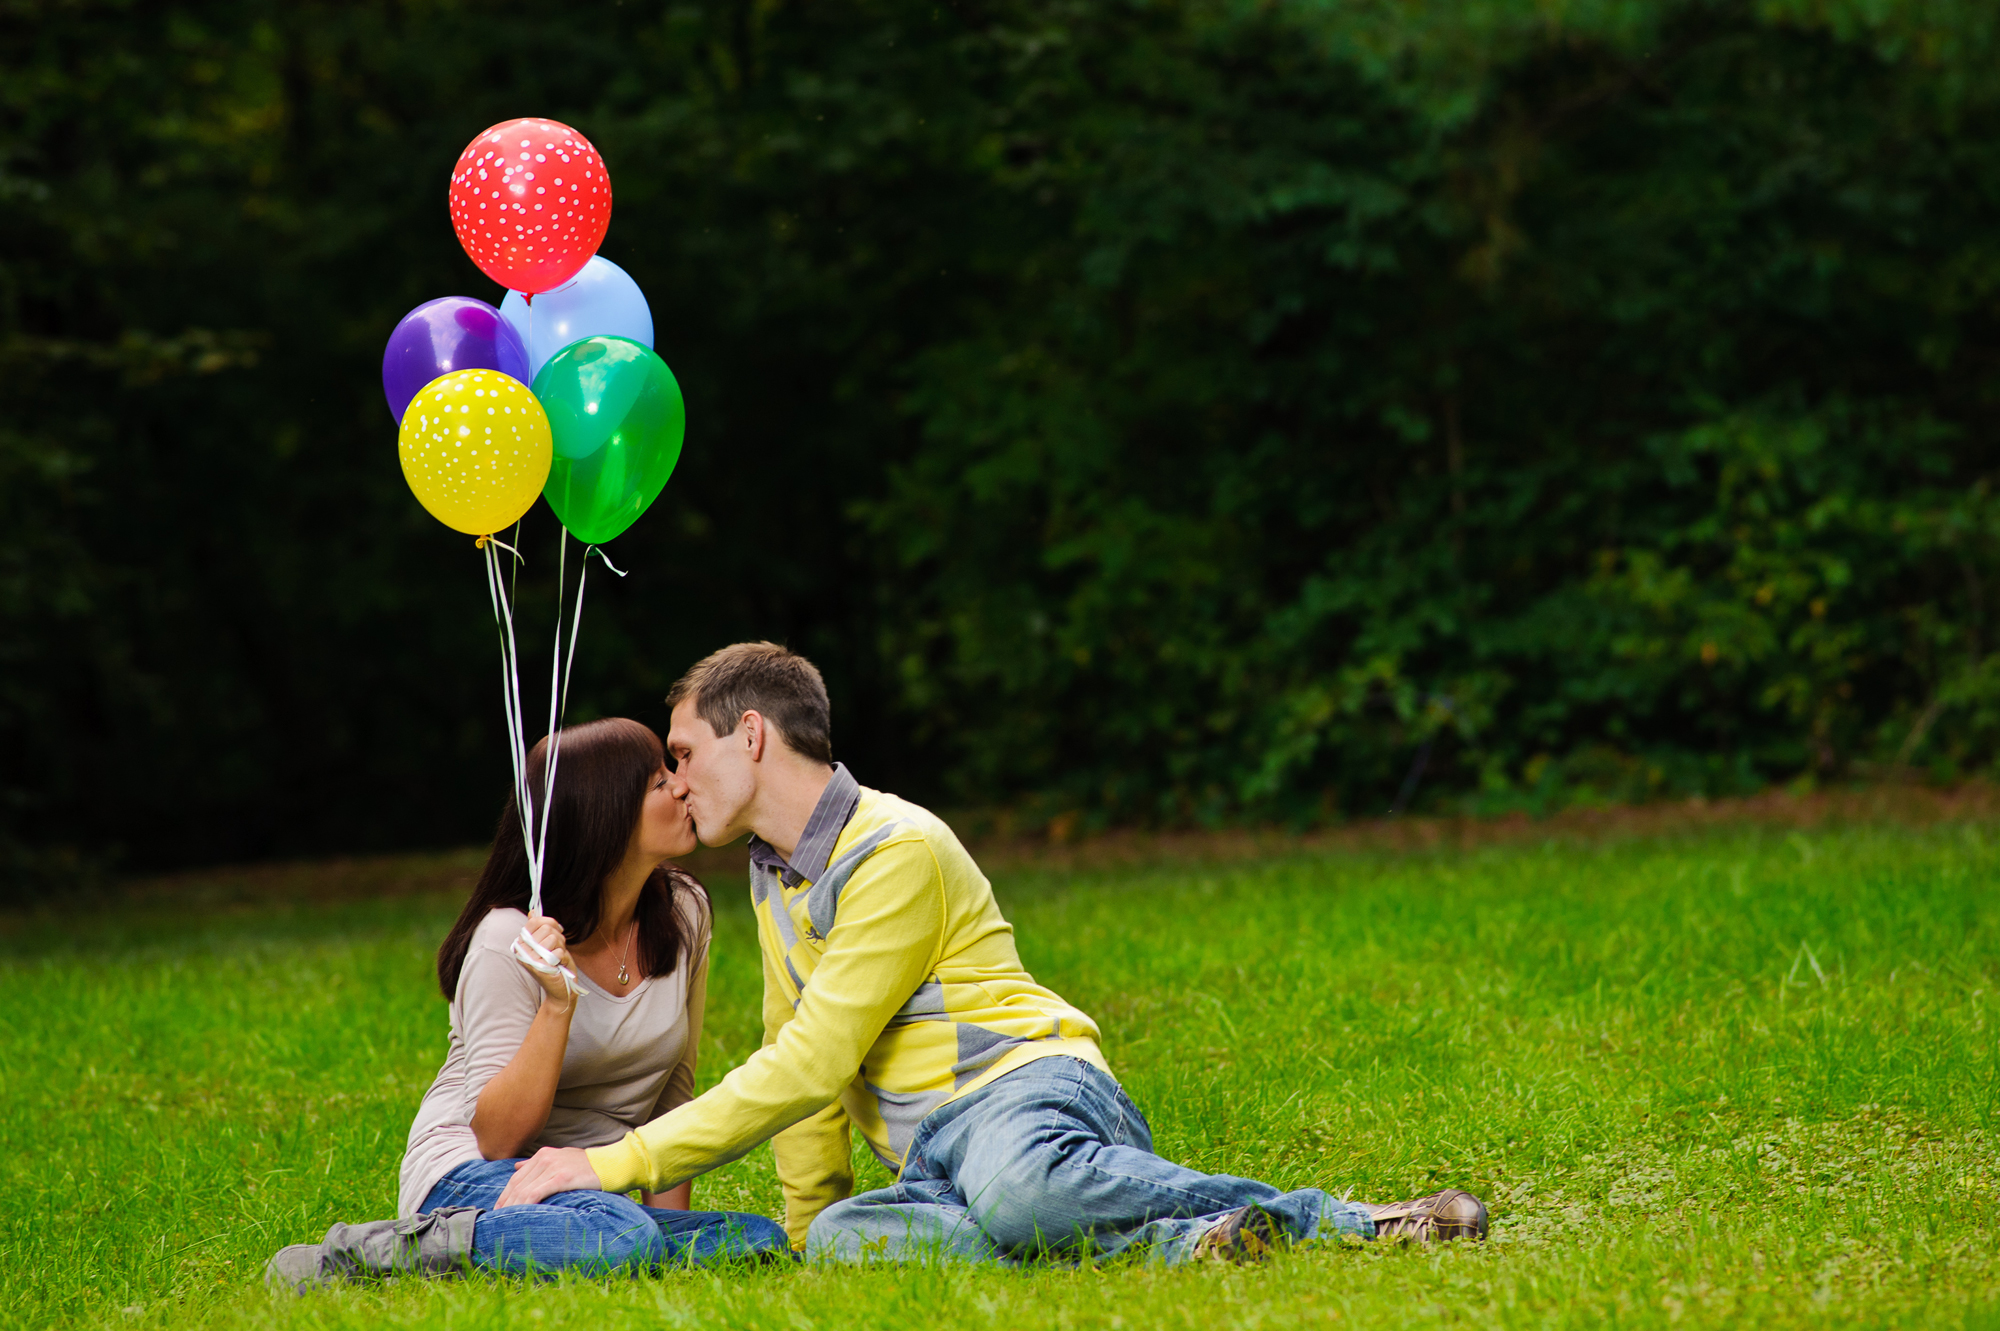 balloons as a prop in an engagement session